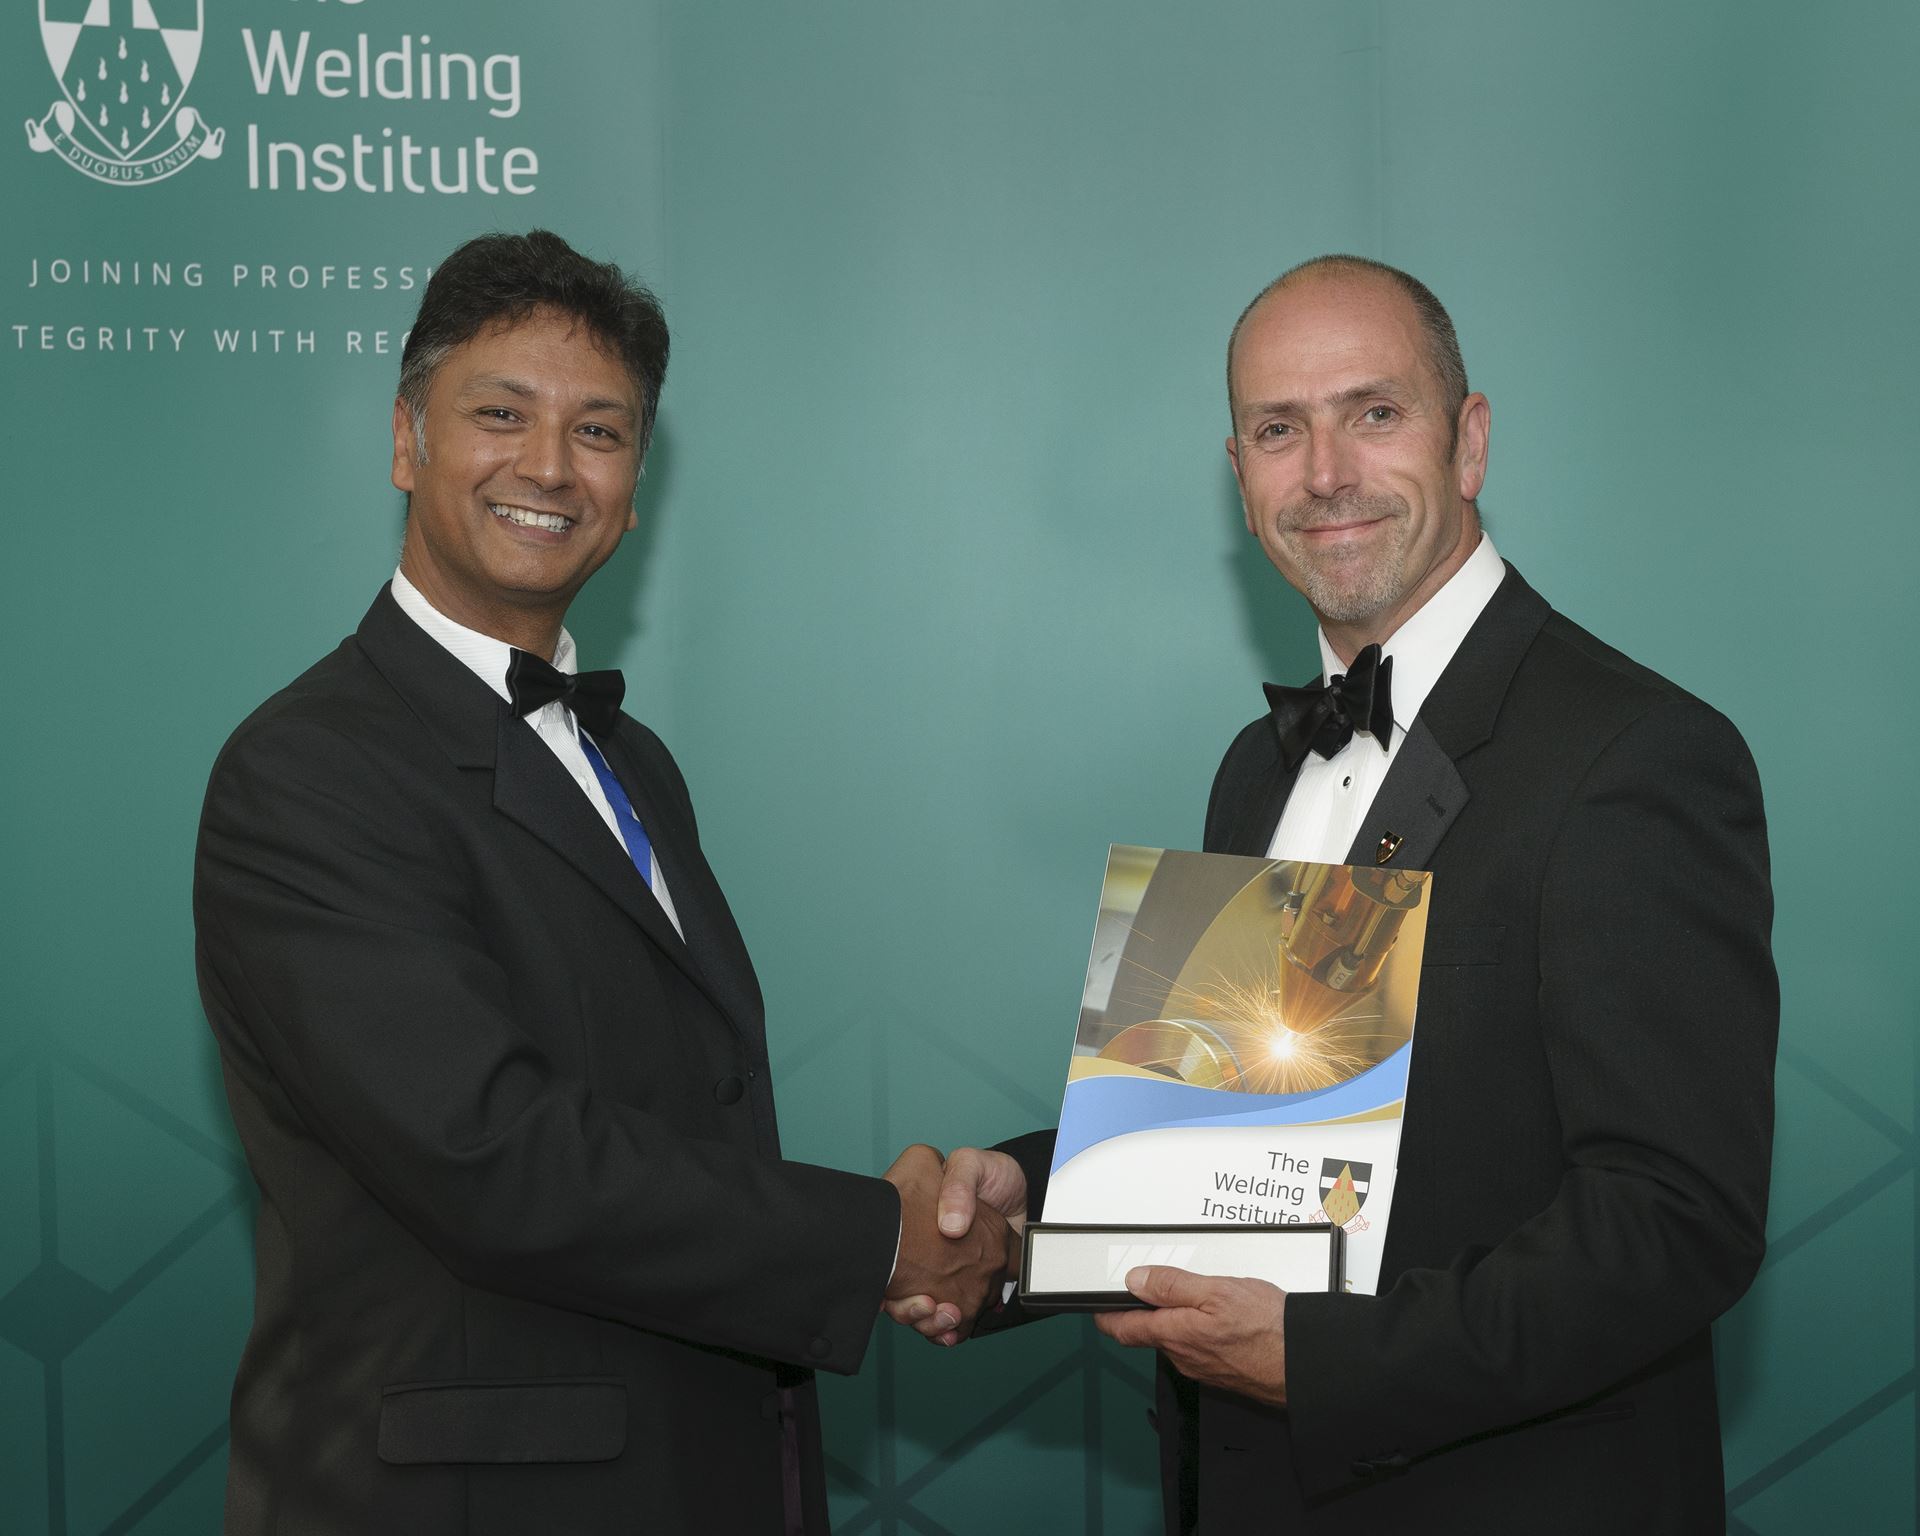 Mike Skyrme (Right) being presented with the Continuous Development and Learning award by Steve Jones (Left)